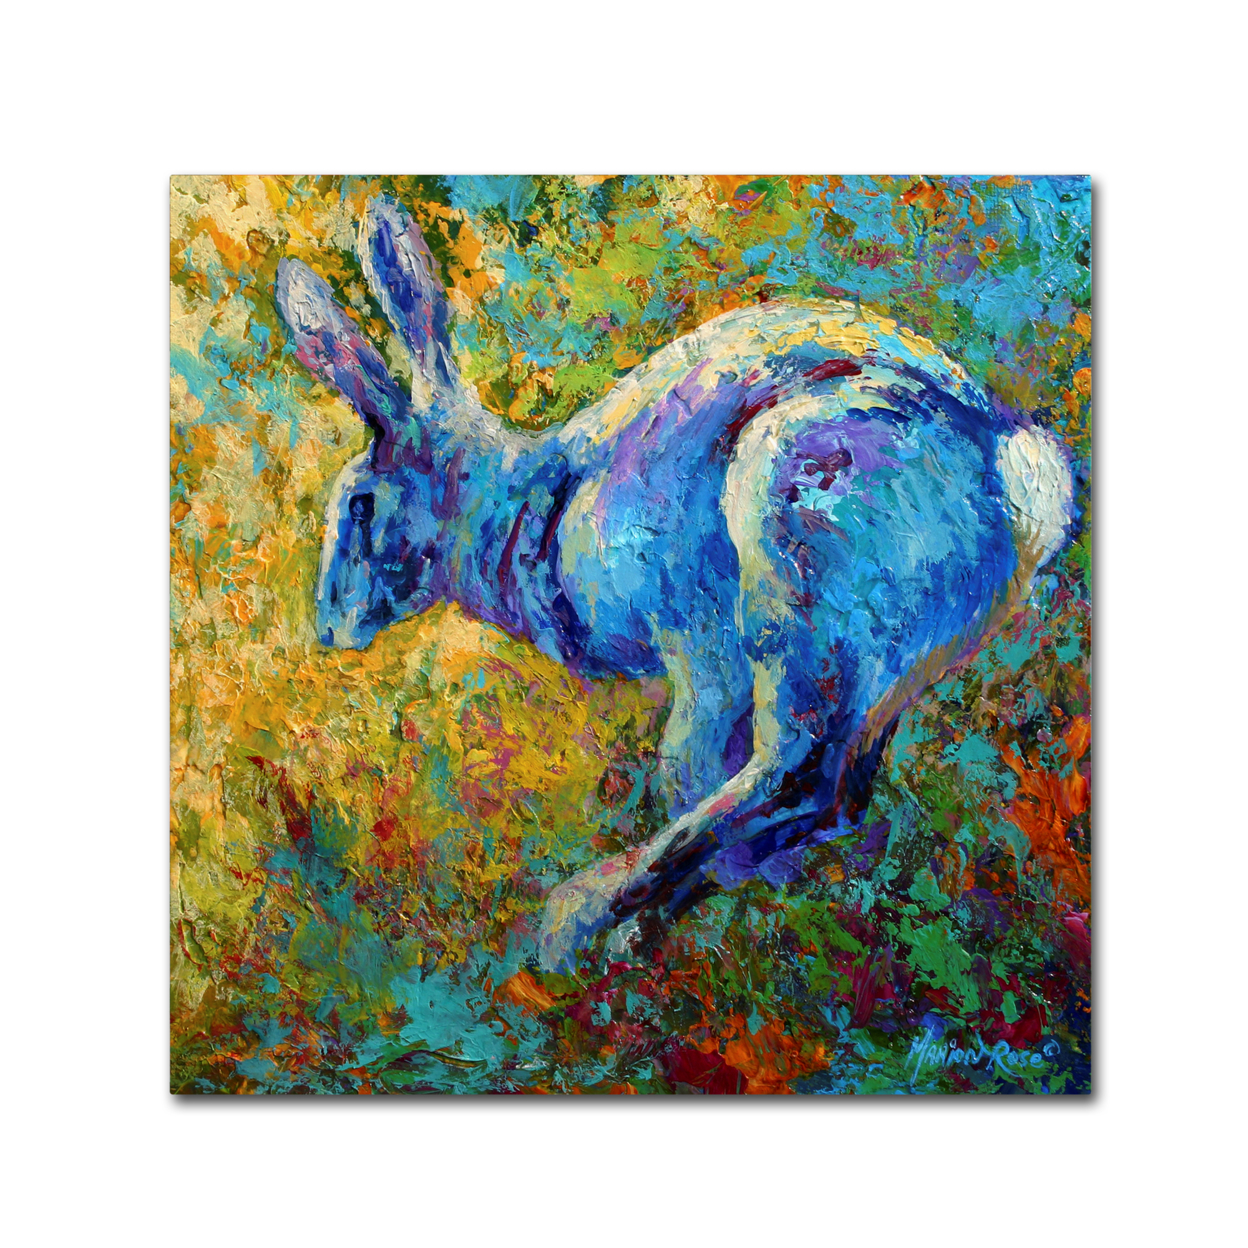 Marion Rose 'Hare' Ready To Hang Canvas Art 14 X 14 Inches Made In USA